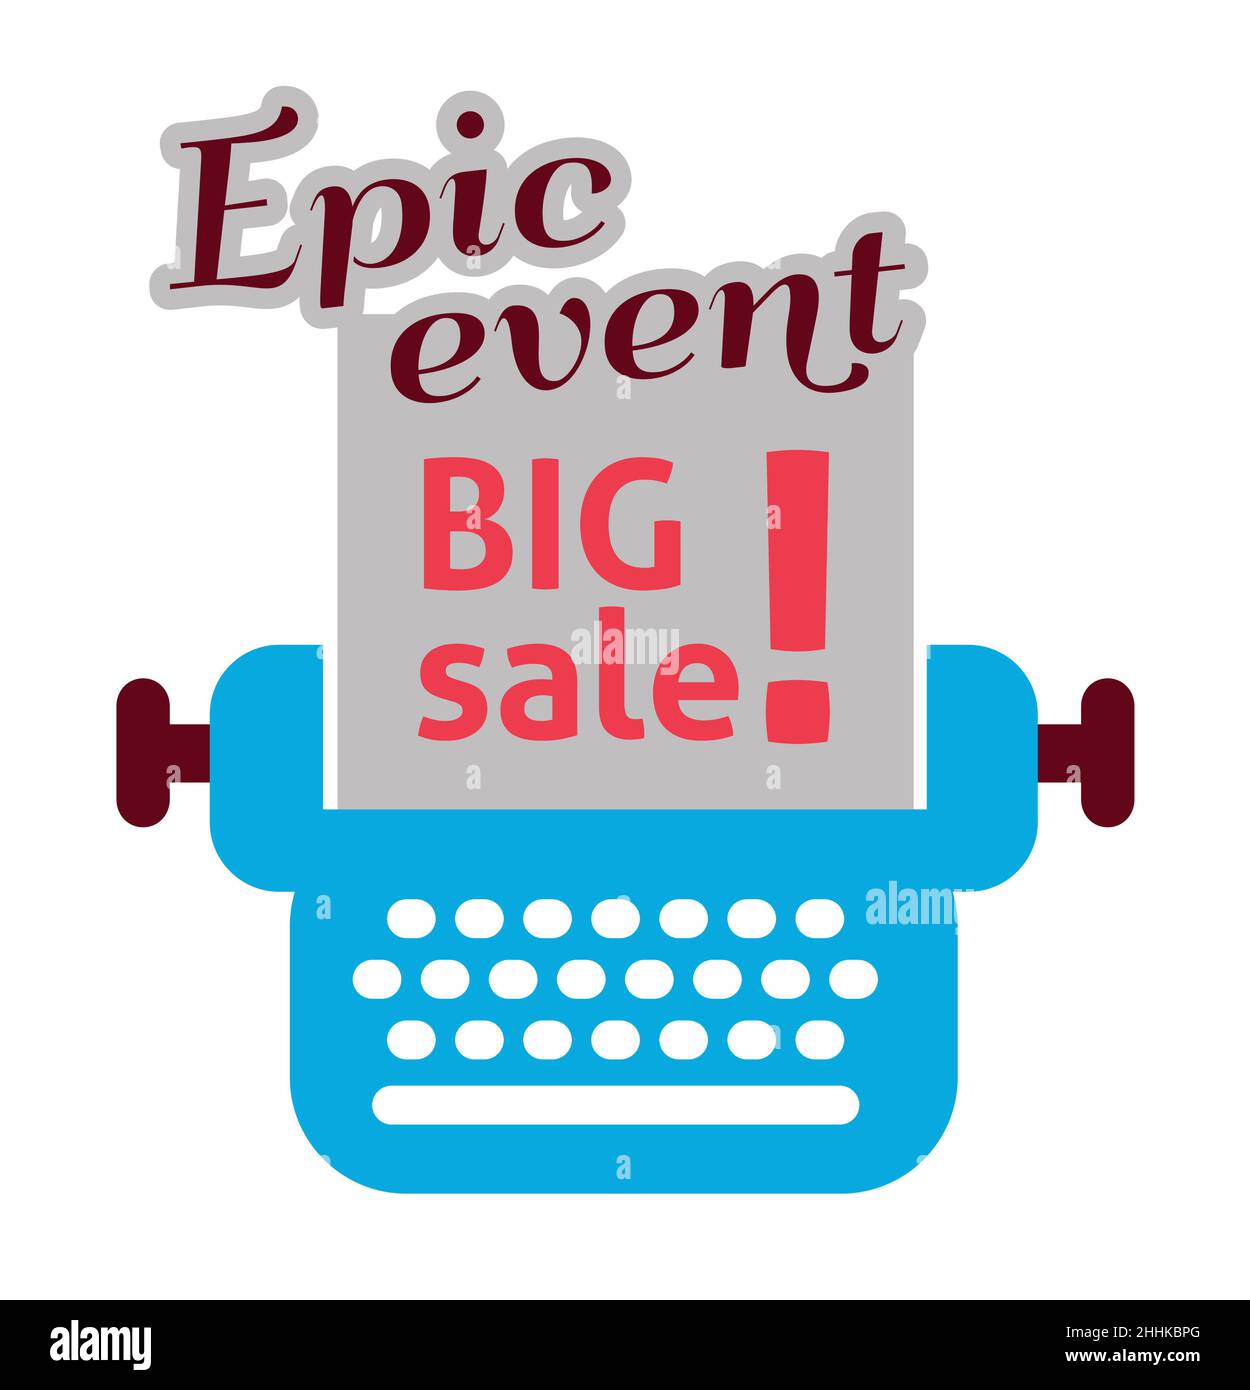 Epic event - Big Sale label, flat vector illustration for graphic and web design Stock Vector